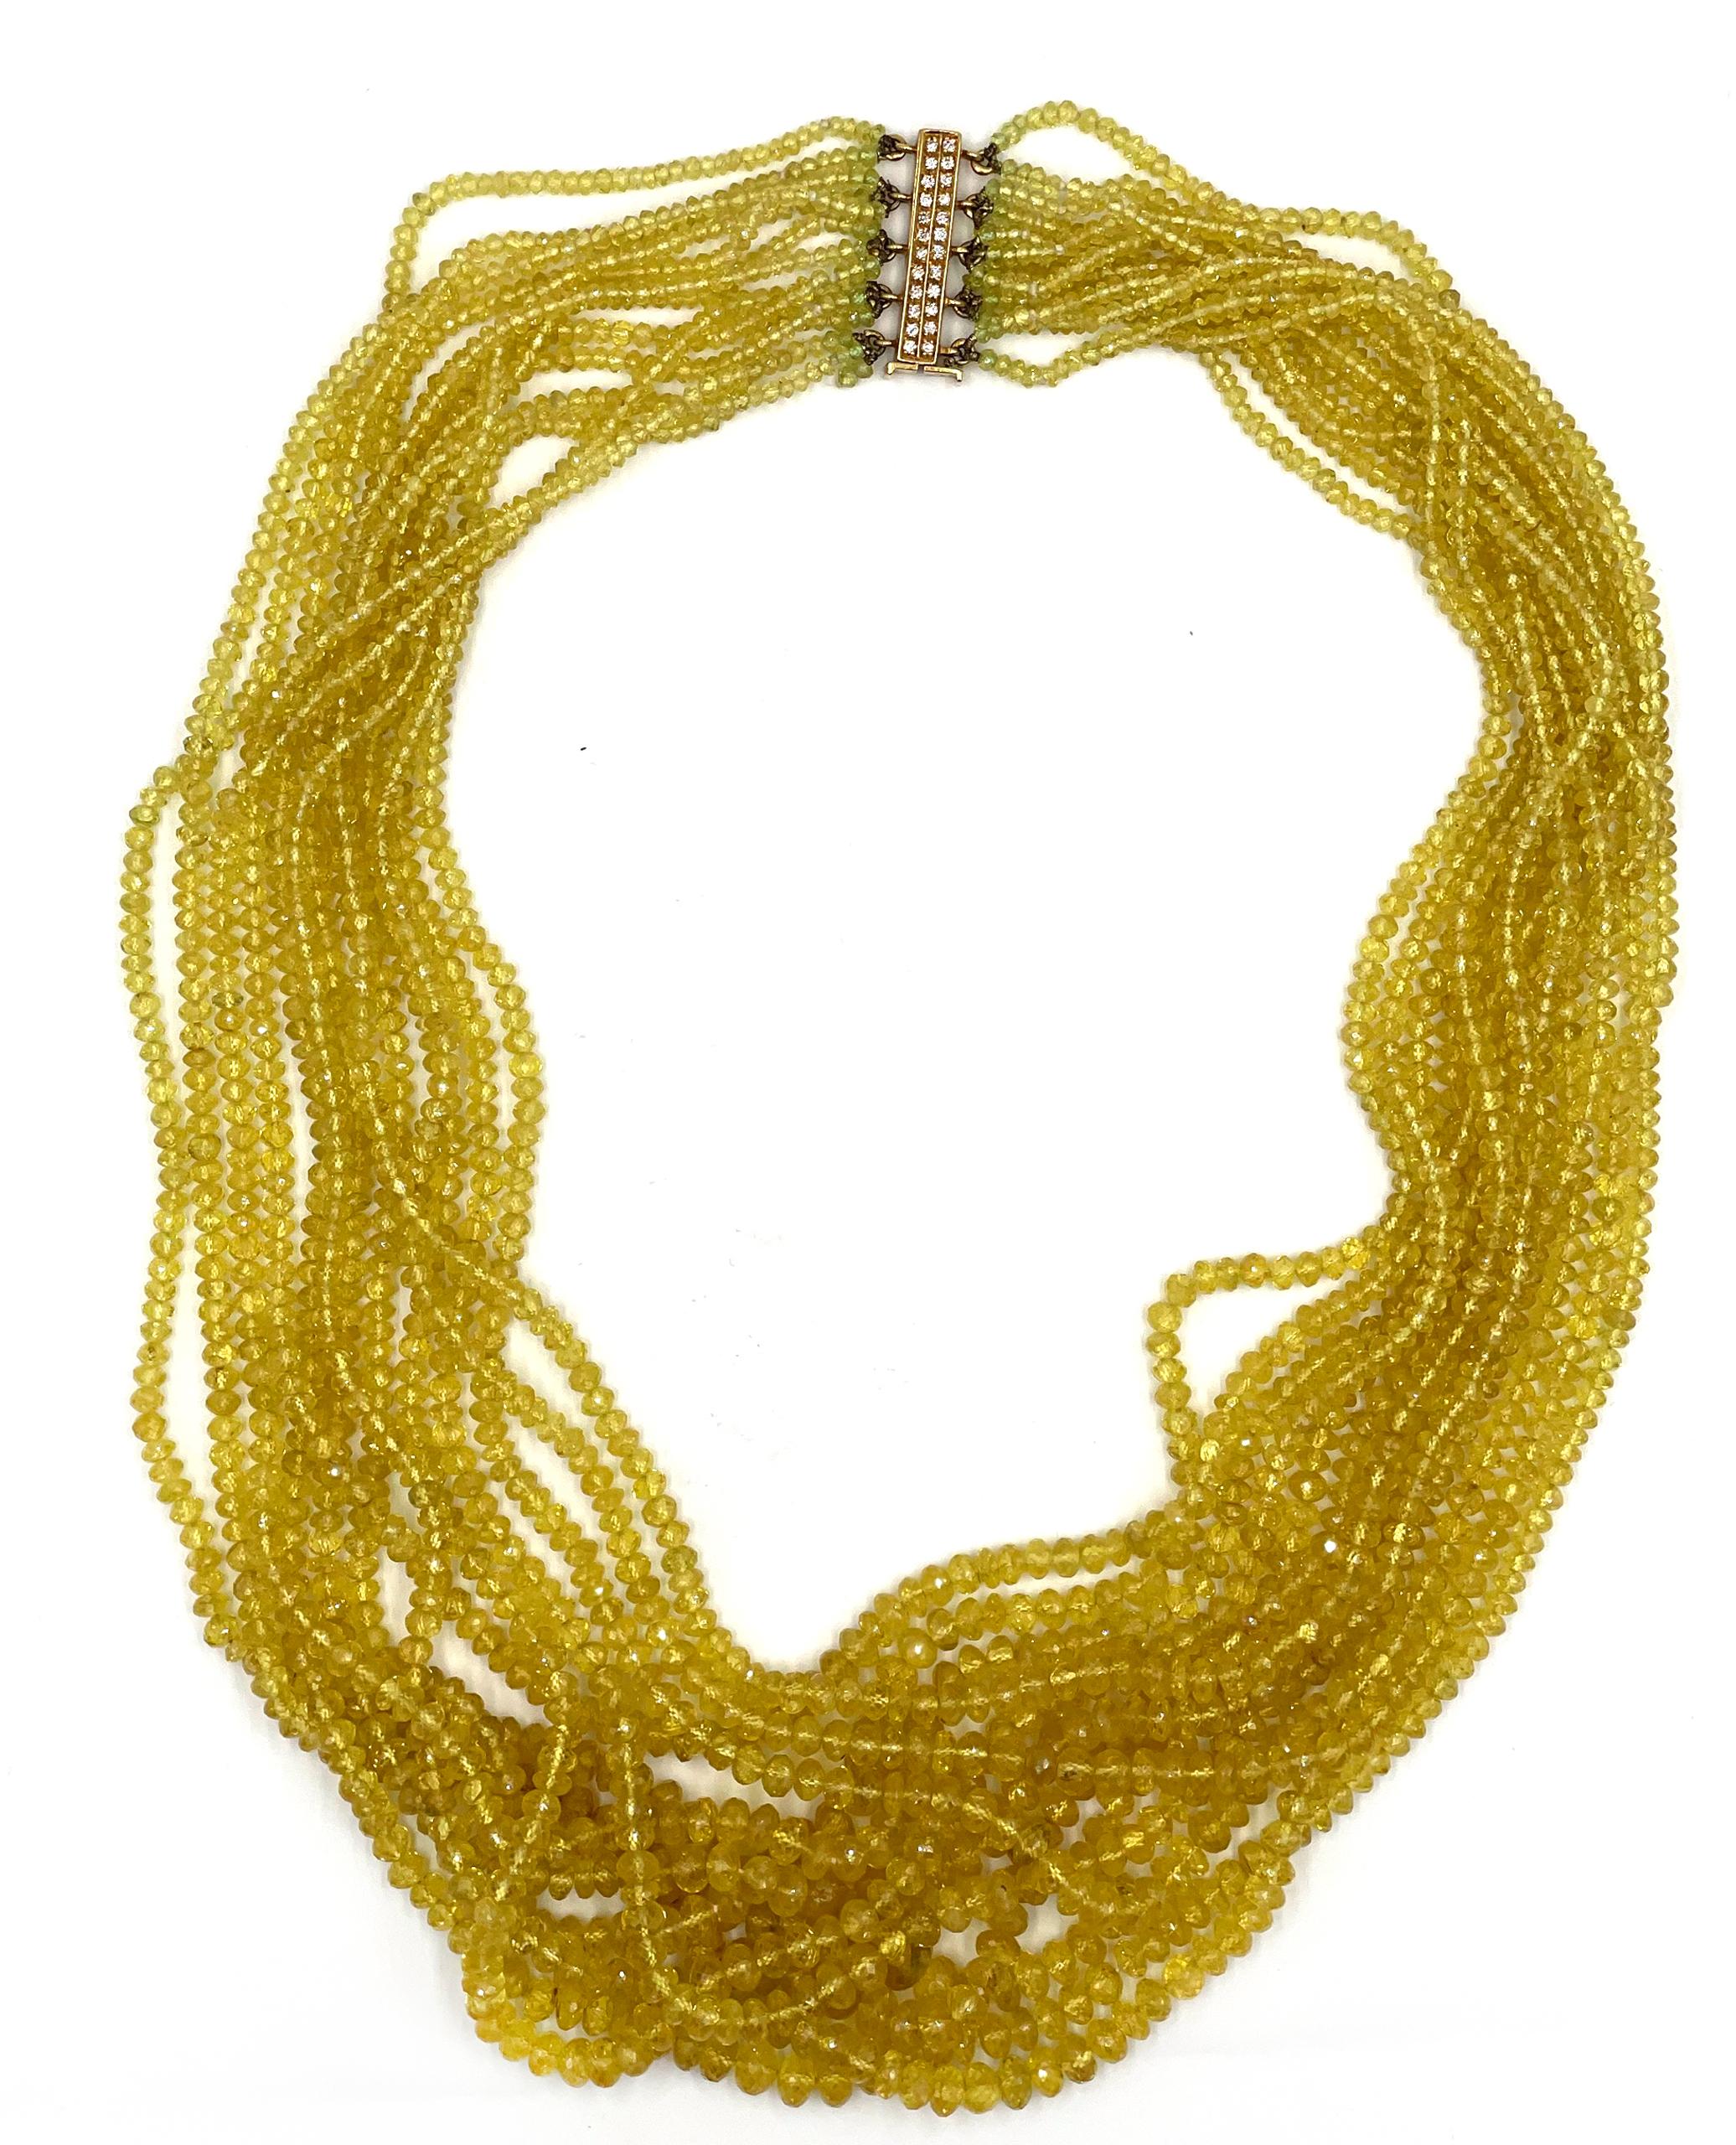 Pre owned vintage estate multi strand golden sapphire necklace with an 18K yellow gold and diamond clasp.  The necklace has 14 strands of faceted yellow sapphire beads and graduate in length from 20 inches to 25 inches long.  The yellow sapphires